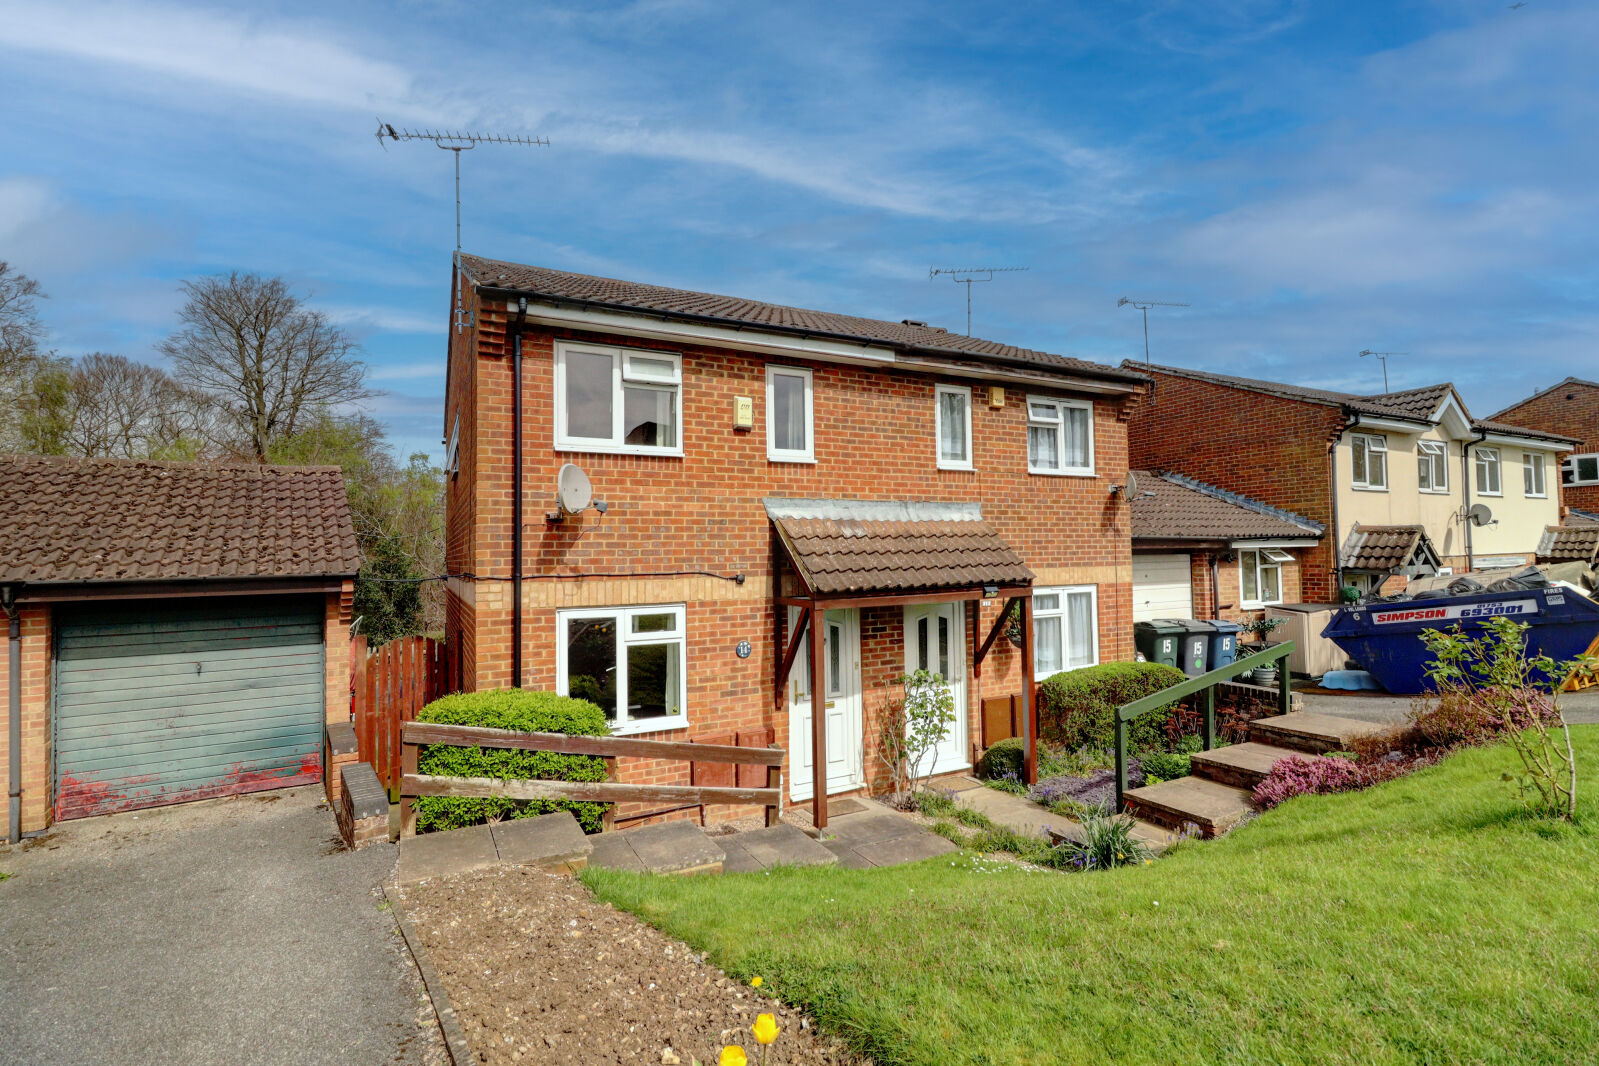 2 bedroom semi detached house for sale Rushbrooke Close, High Wycombe, HP13, main image